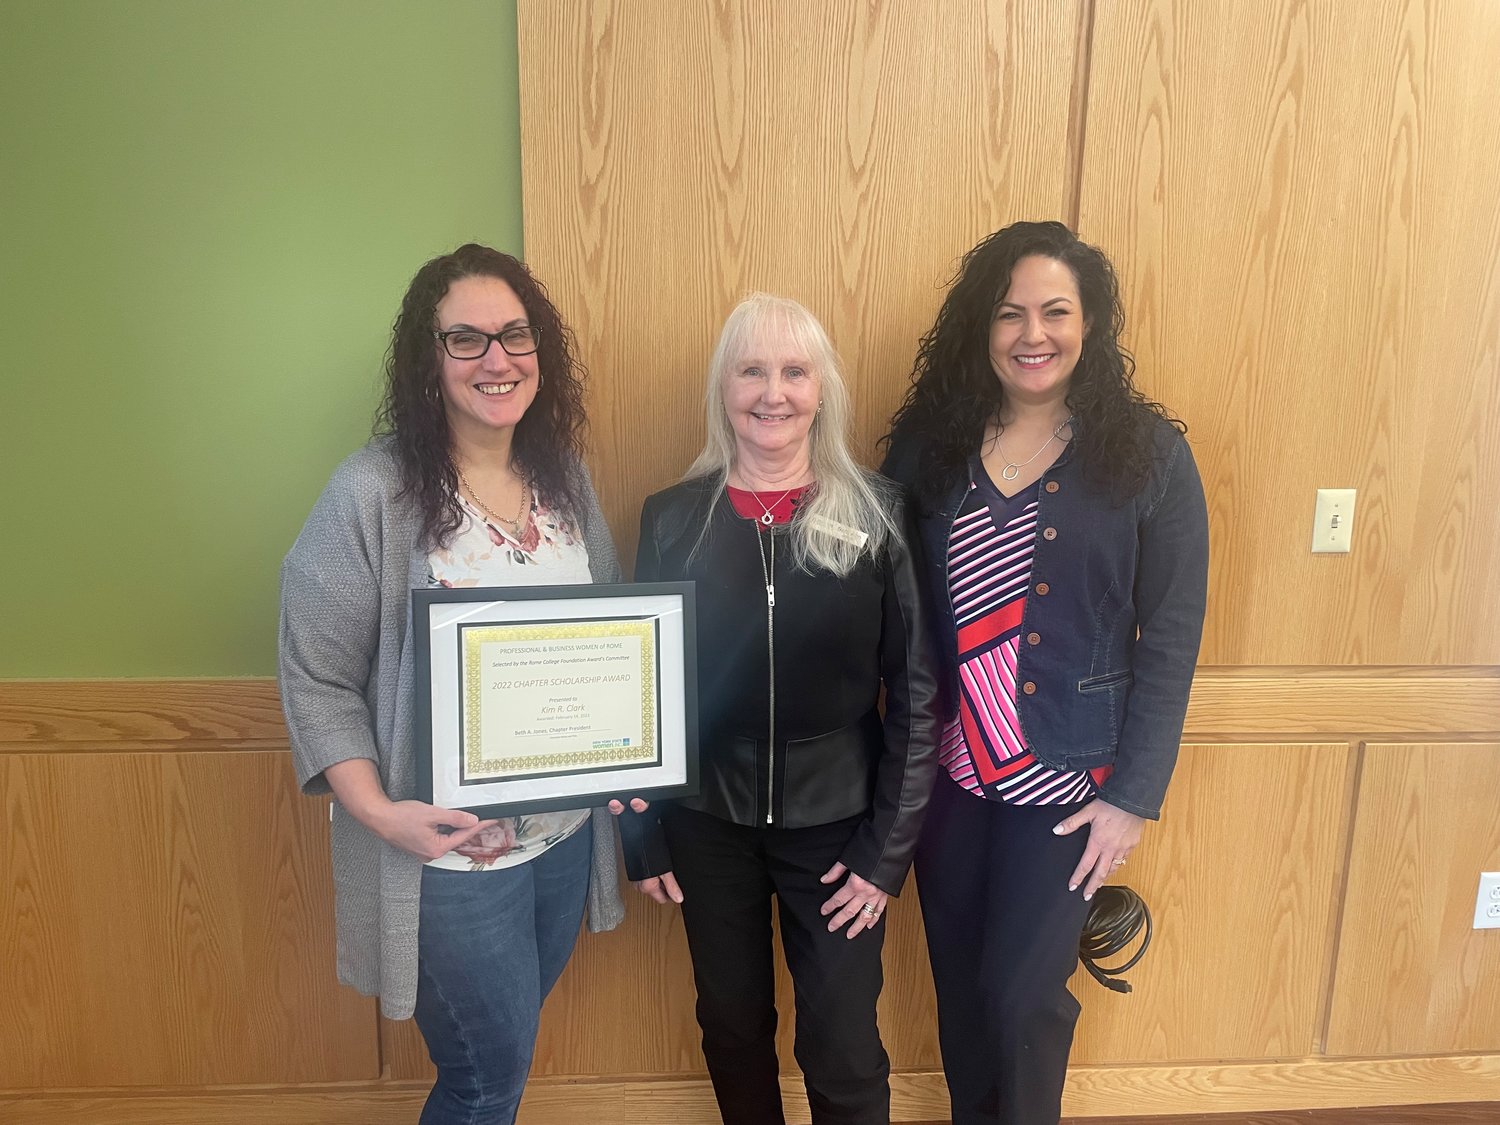 Several local students were recognized for their academic performance at the Rome College Foundation Scholarship Luncheon on Tuesday, Feb. 14, at the Rome campus of Mohawk Valley Community College. From left: Kim Clark, who received the Rome Professional &amp; Businesswomen Scholarship; and Beth Jones and Jaimie Stasio, of the Professional Business Women of Rome.